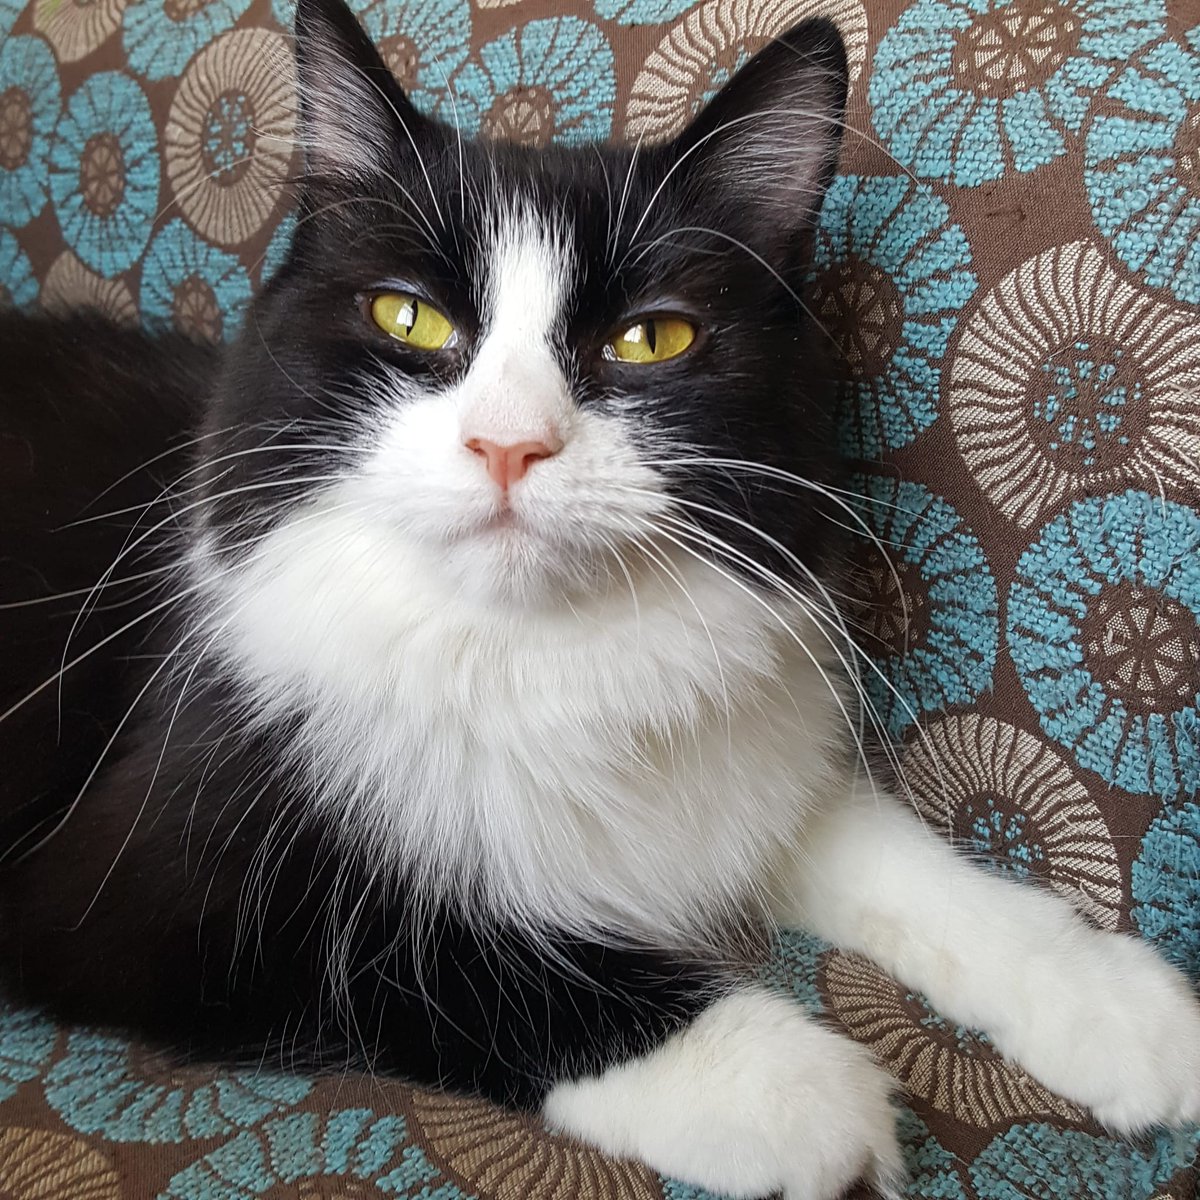 #Throwback to the glamorous Sheila, who came into our care in 2020 after being abandoned by her owner at Medivet. She found a brilliant forever home - see for yourself on Instagram at @sheilathetux!
#ThrowbackThursday #FormerFoster #ForeverHome #AdoptACat #HappyEnding